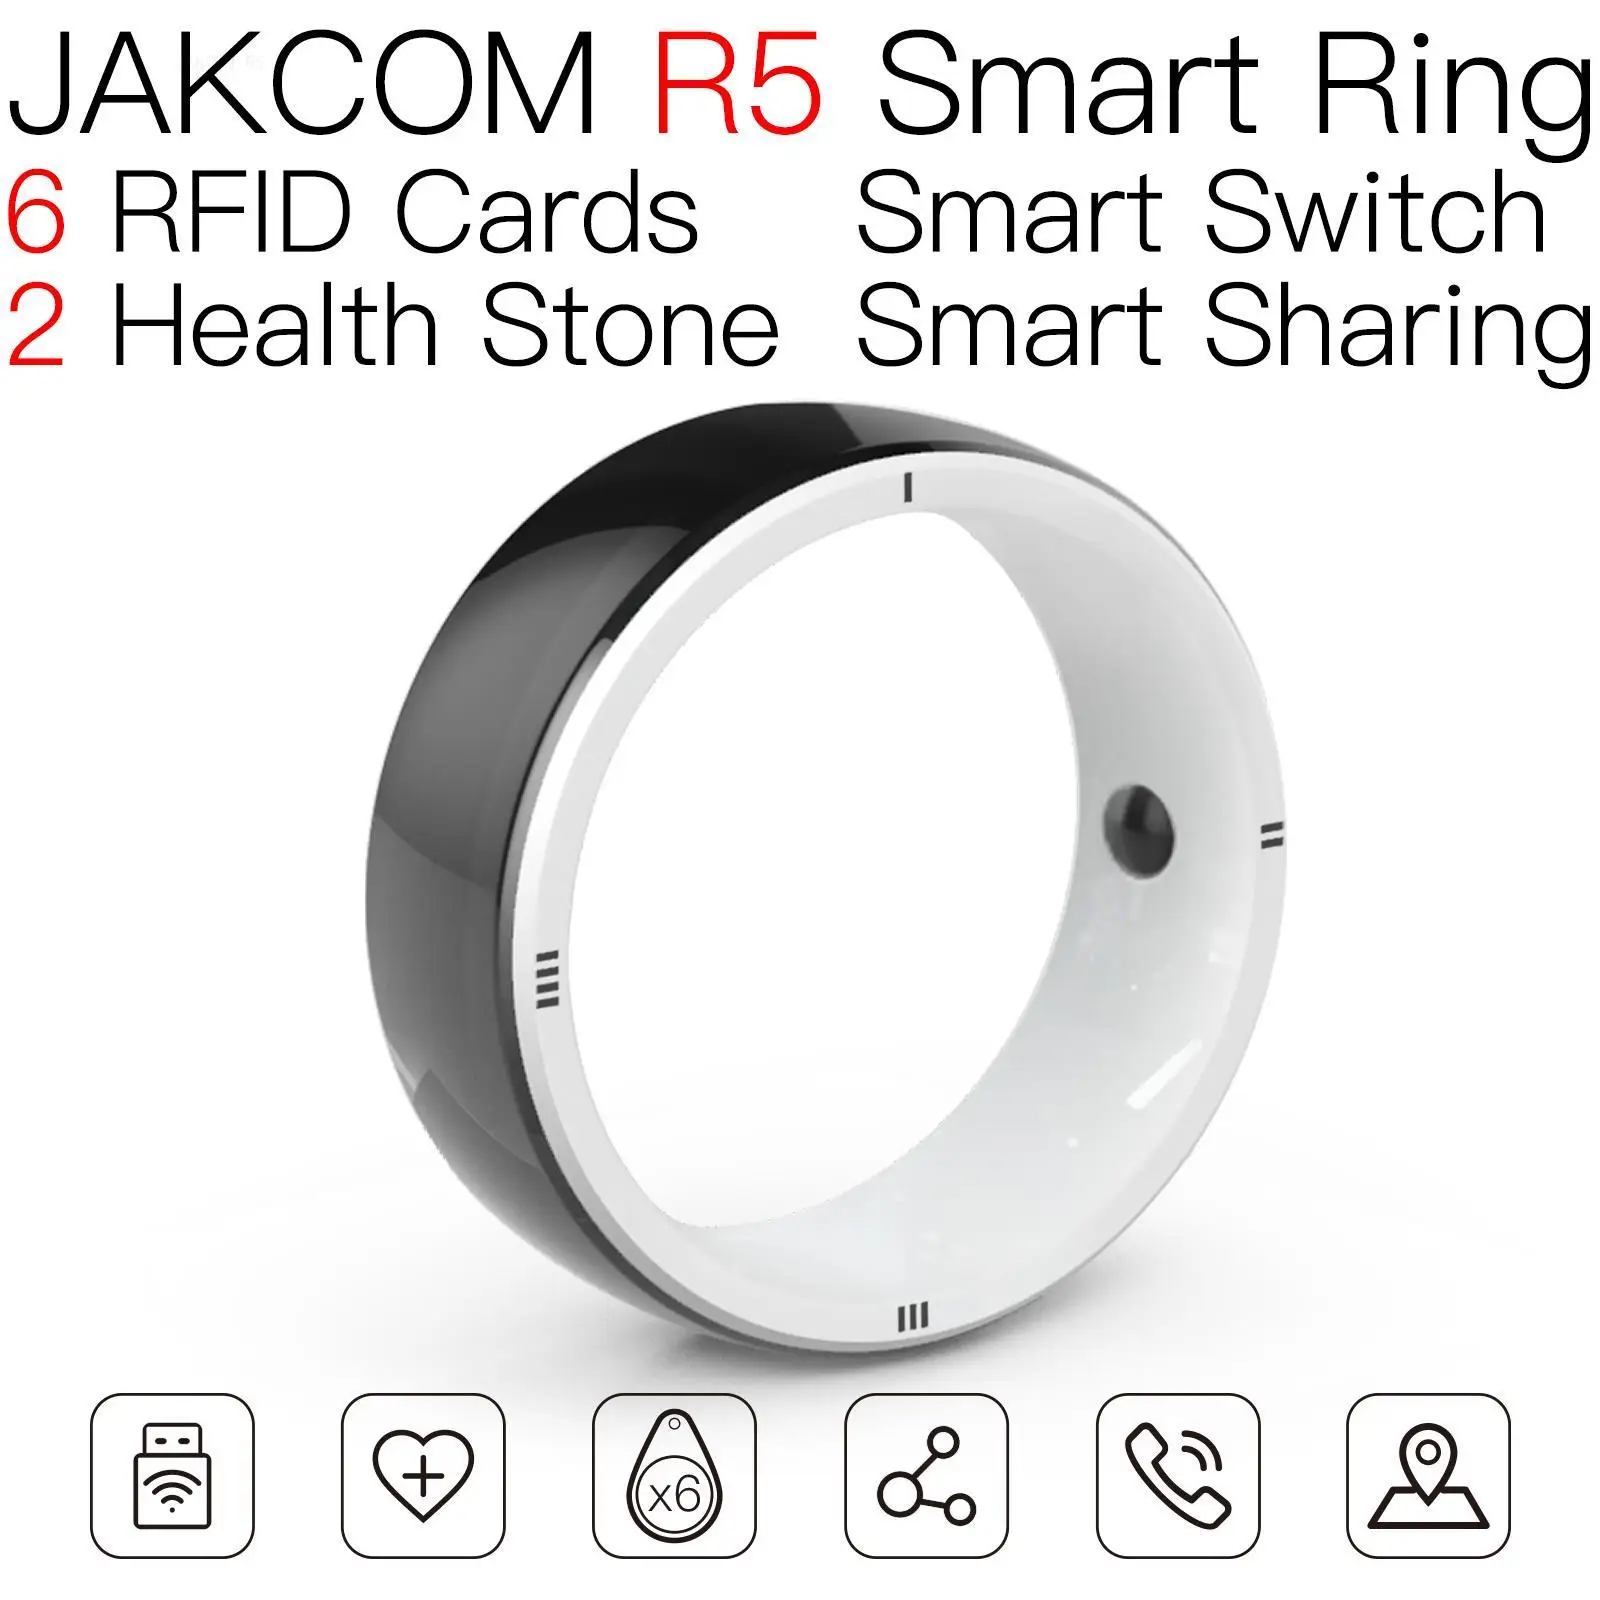 

JAKCOM R5 Smart Ring Newer than material island uhf rfid tag passive 7 byte uid changeable asic plastic chip the dog